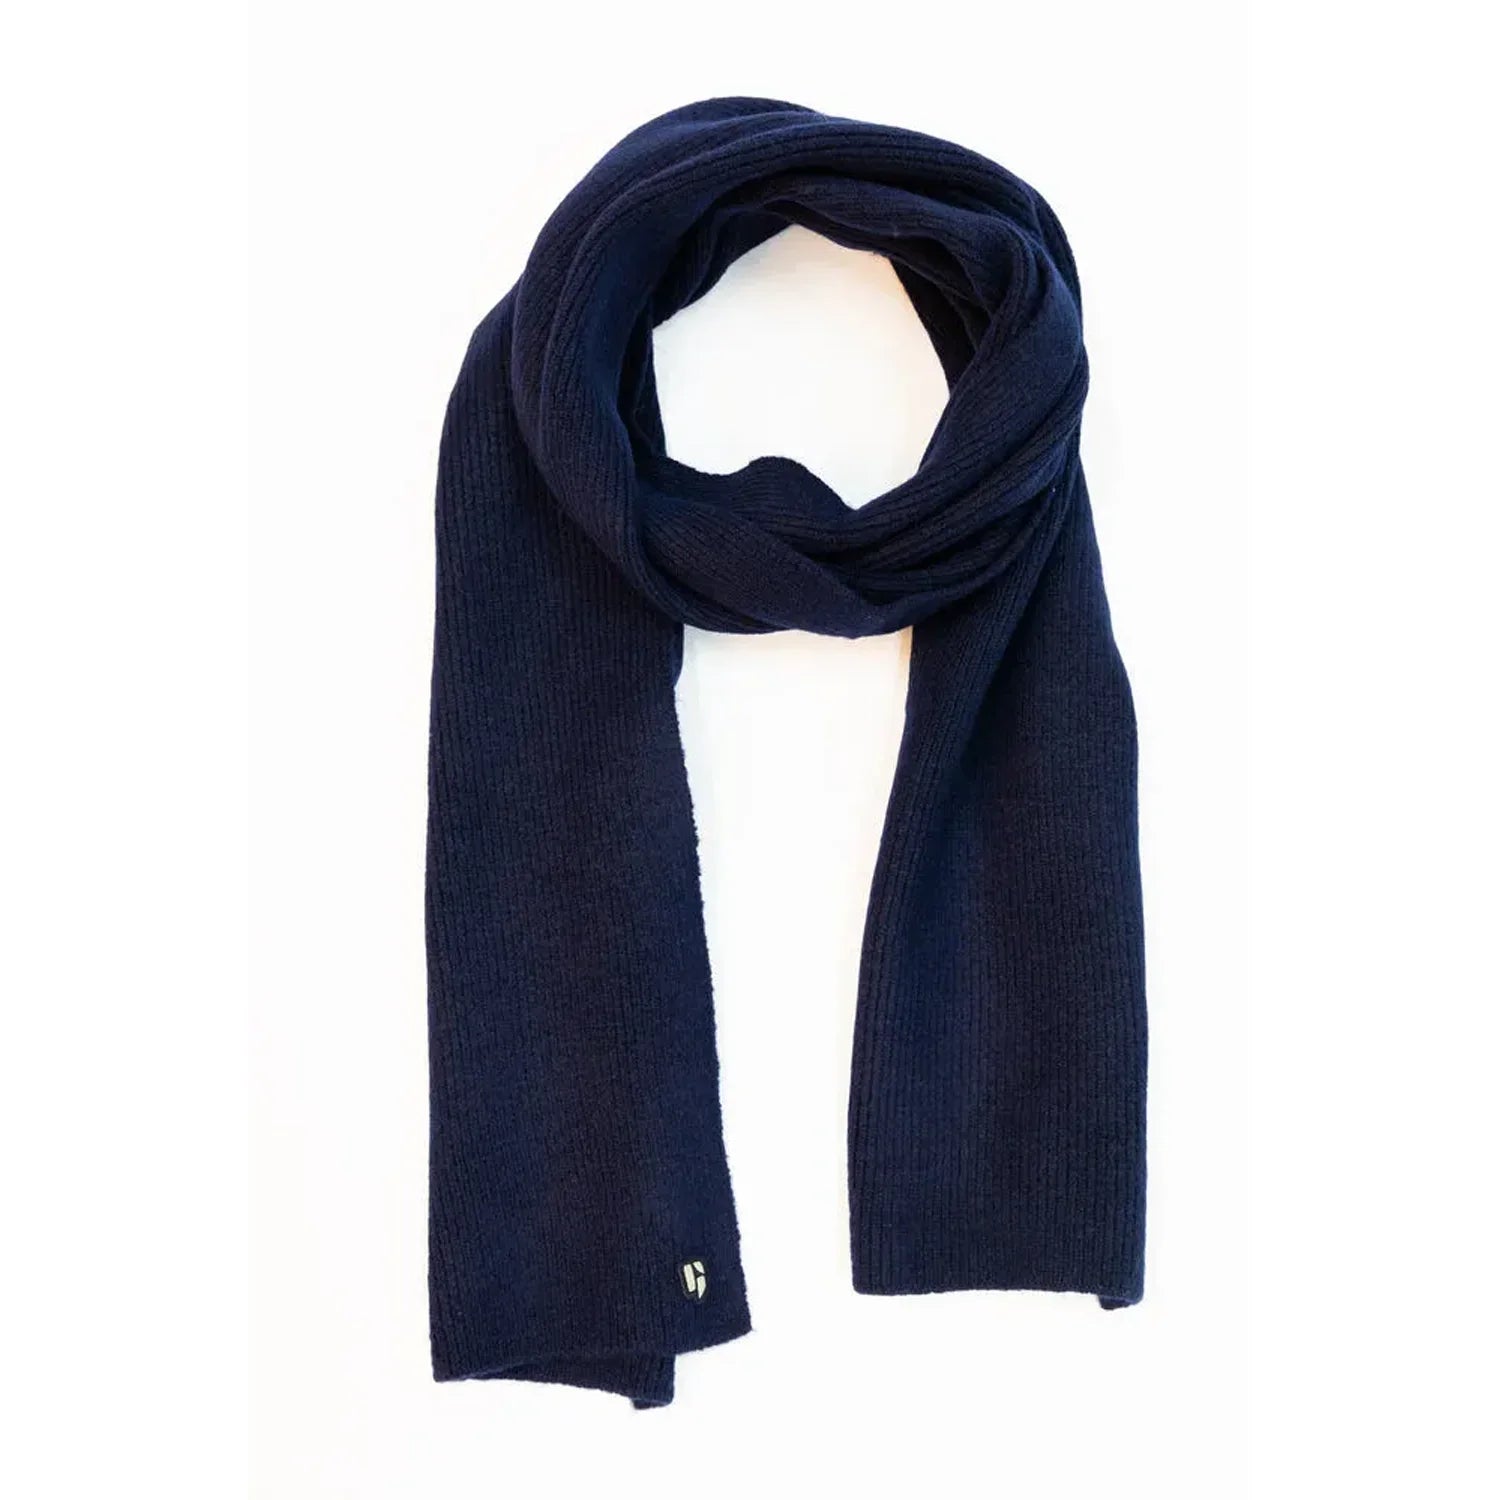 'Garcia I31331 Knitted Scarf' in 'Dark Moon' colour